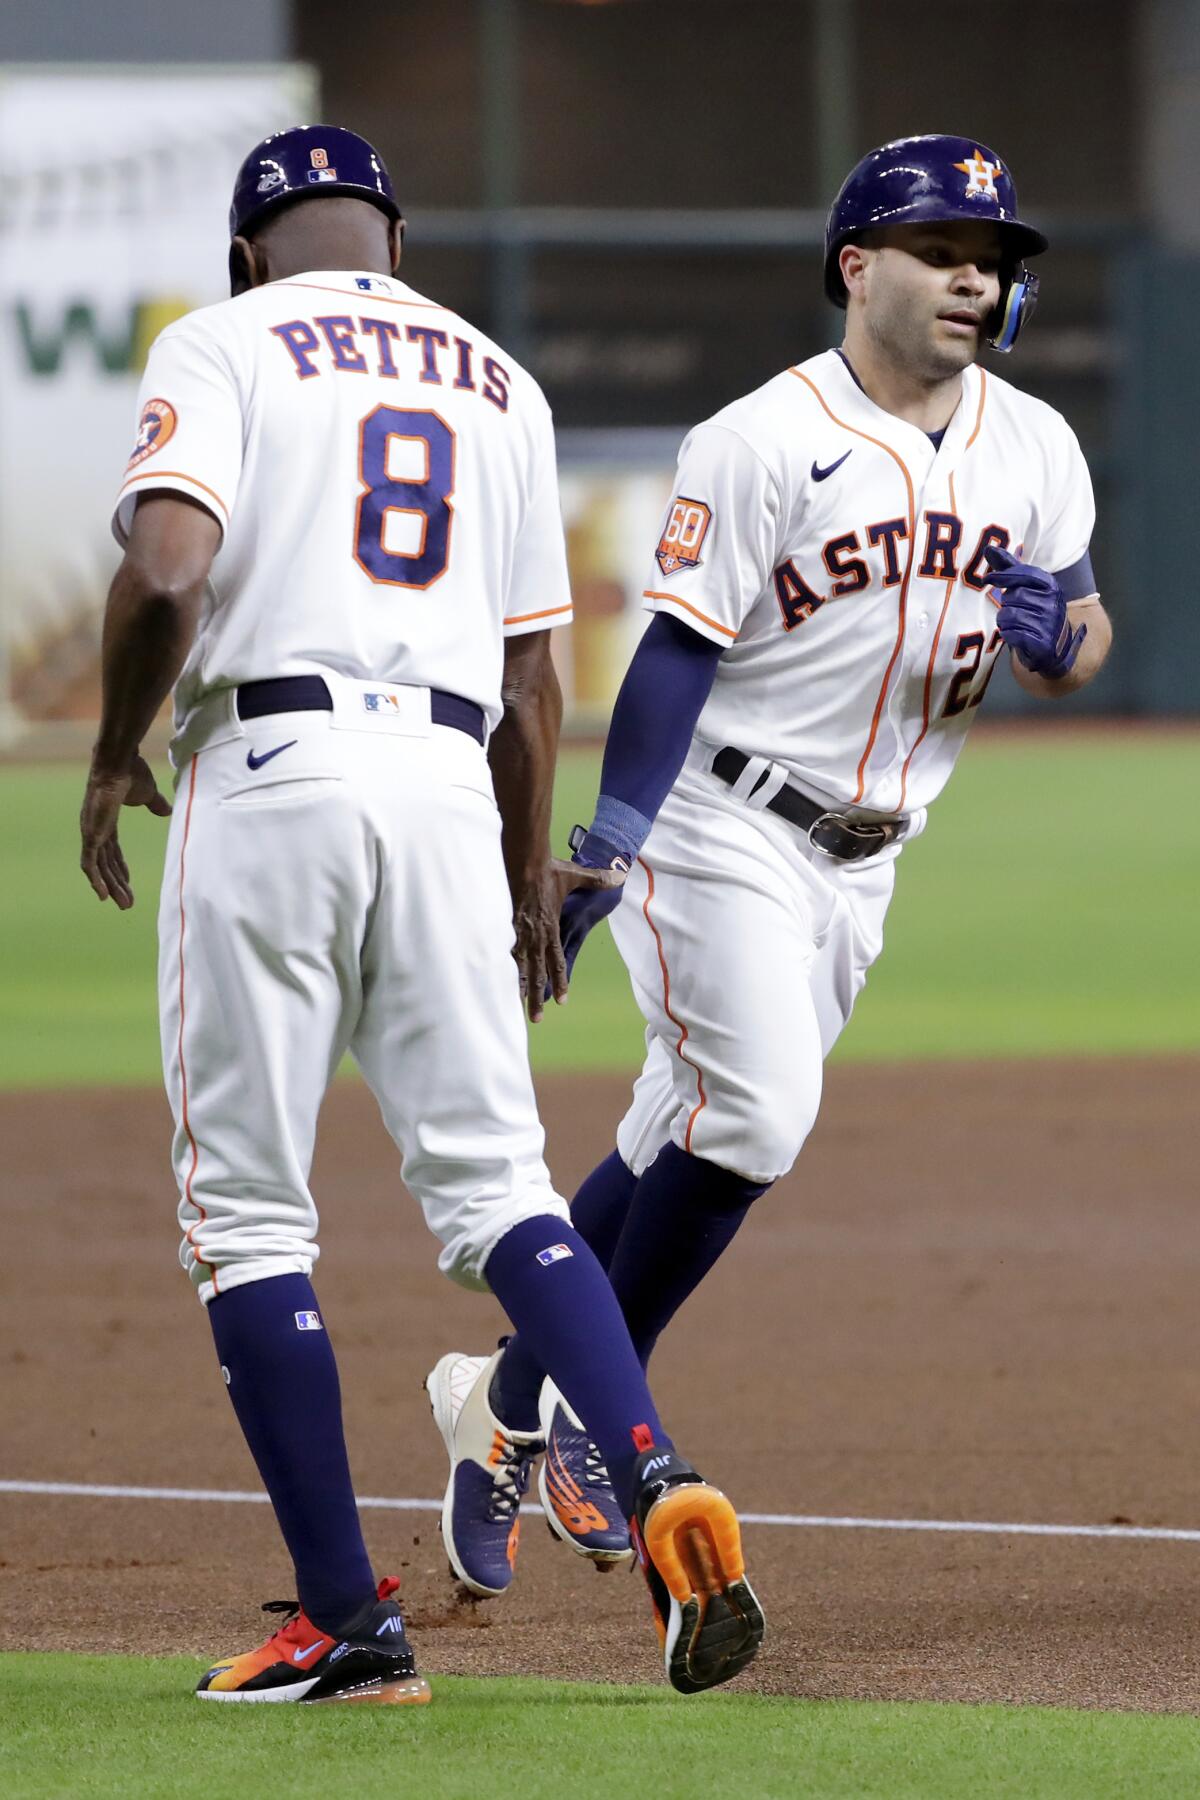 Houston Astros - Tonight's uniforms are incredible.